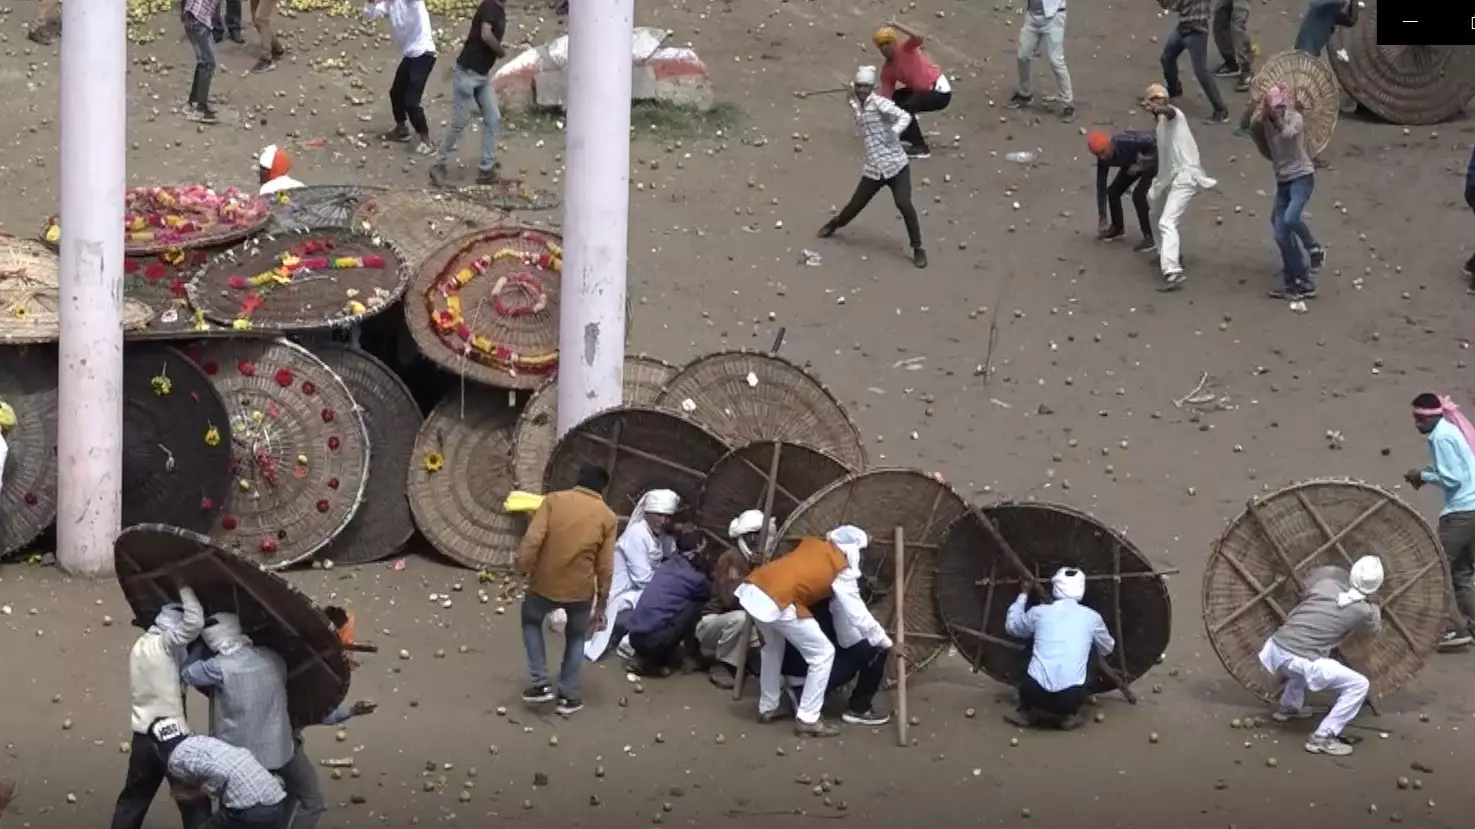 Over 120 People Injured At Indian Stone-Pelting Festival